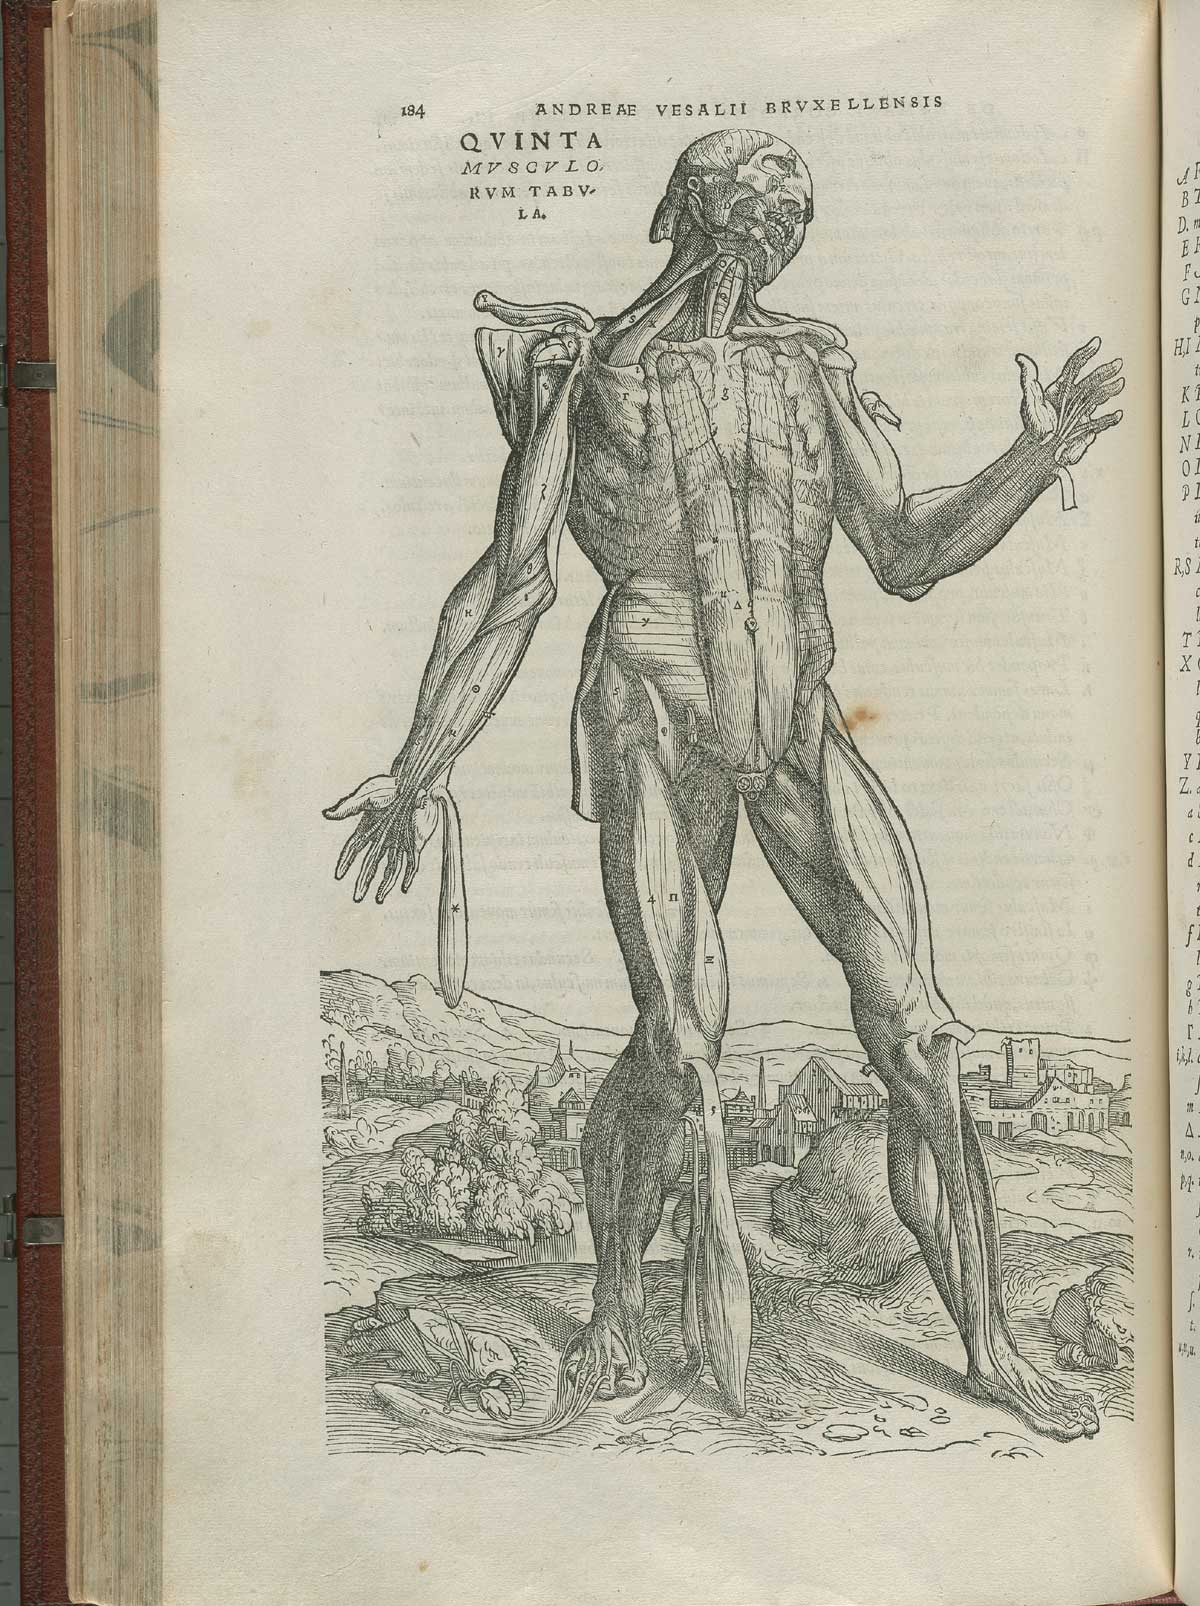 Page 184 of Andreas Vesalius' De corporis humani fabrica libri septem, featuring the illustrated woodcut of the fourth muscle plate, a full-length frontal view of a standing nude male in landscape. His skin is flayed, exposing his insides, and his head is tilted to the left.